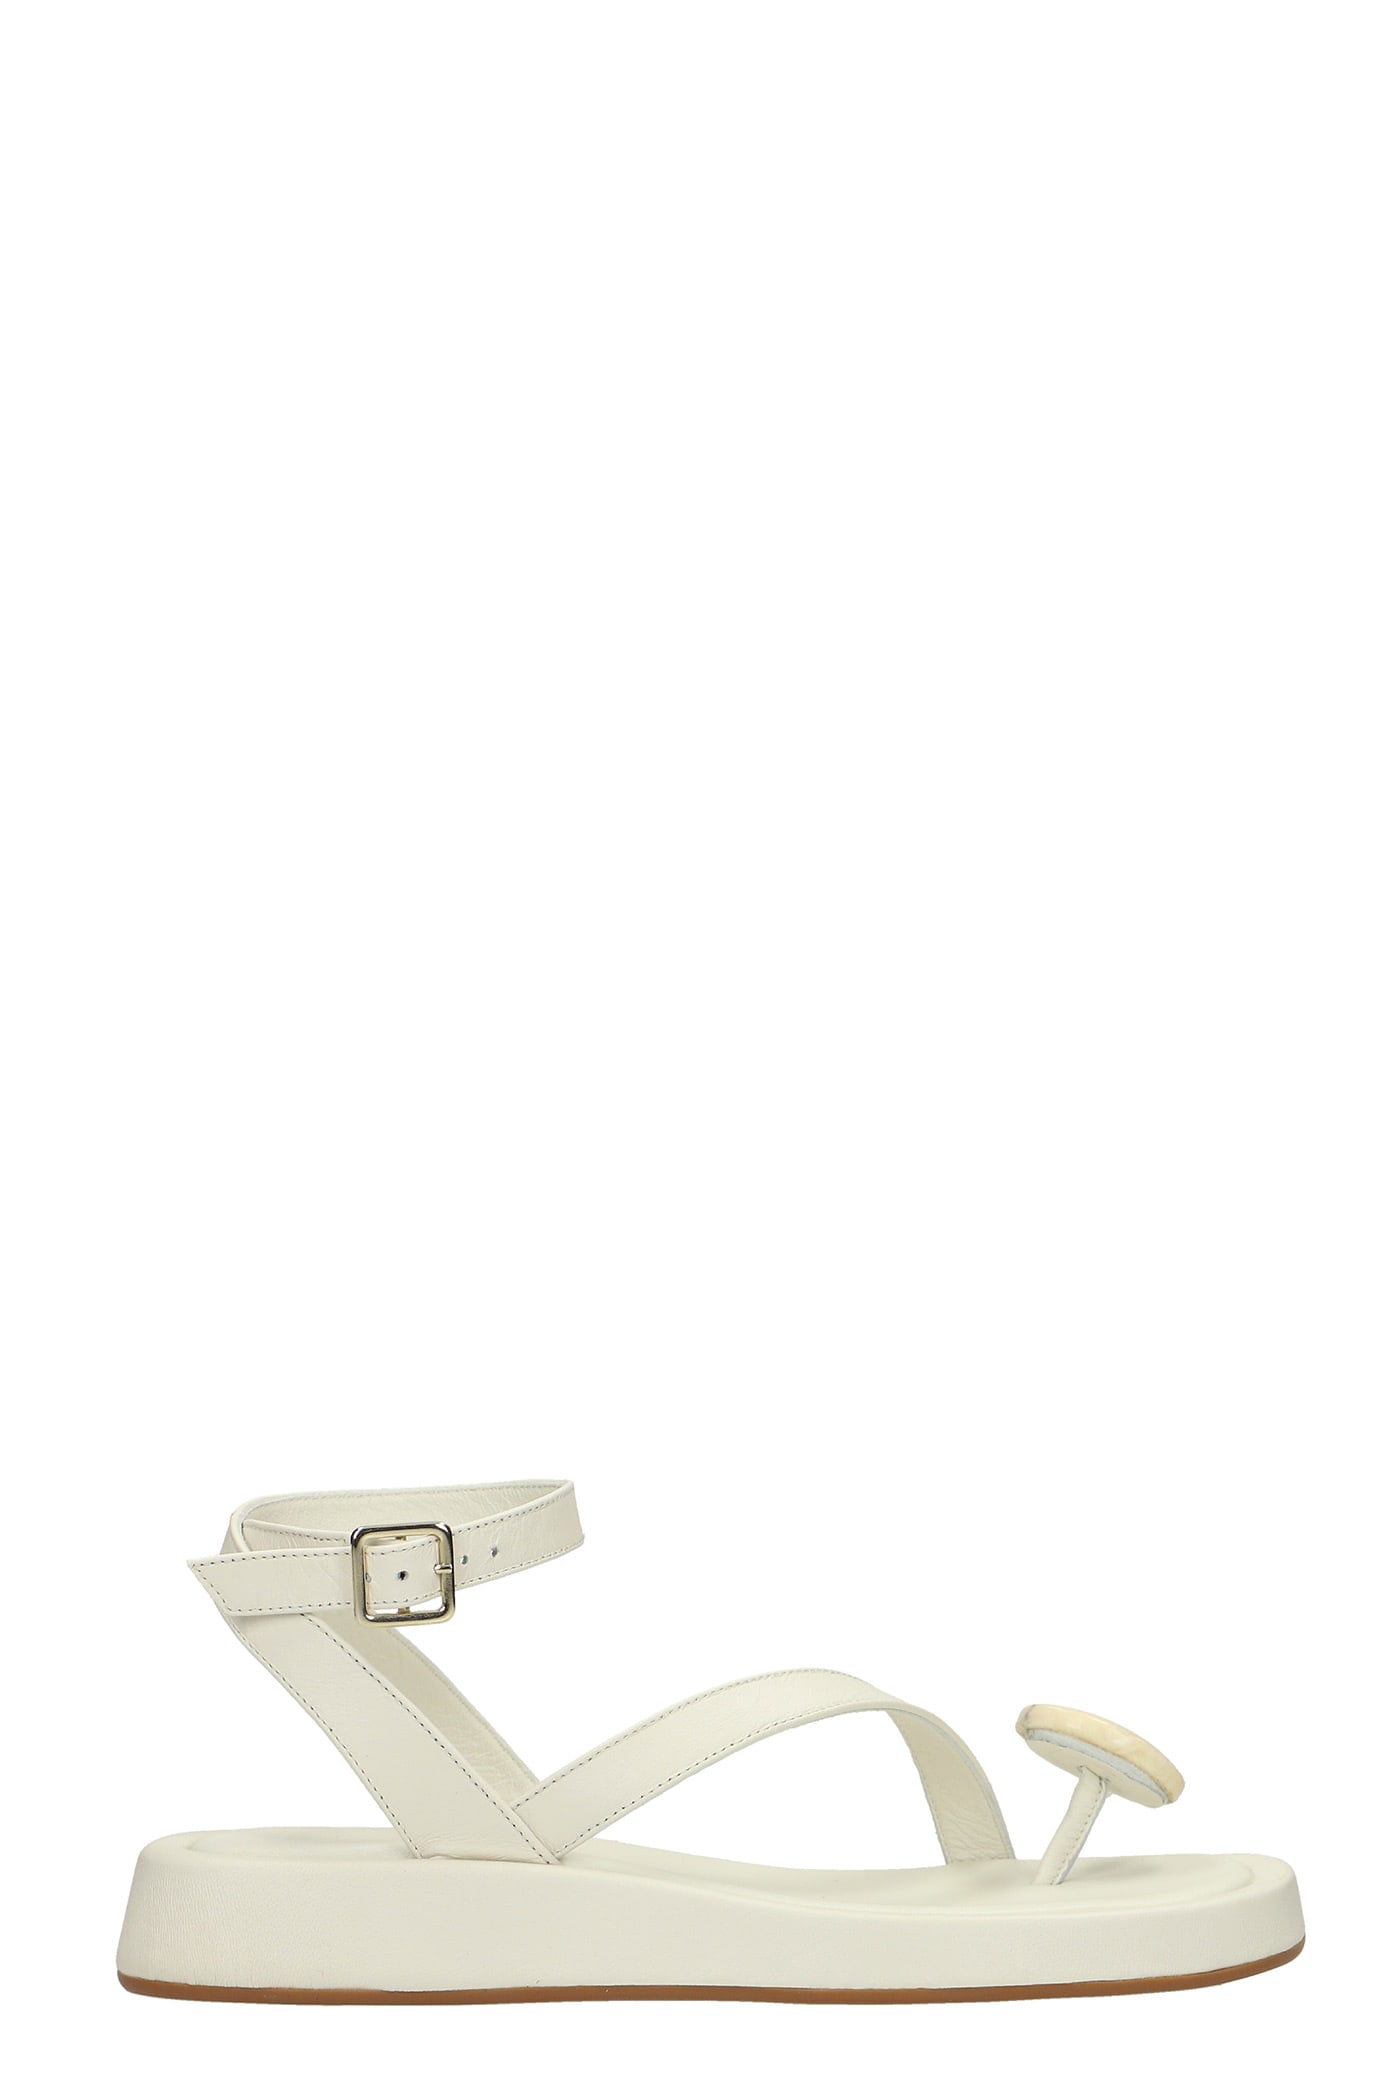 Gia X Rhw Rosie 18 Flats In White Leather